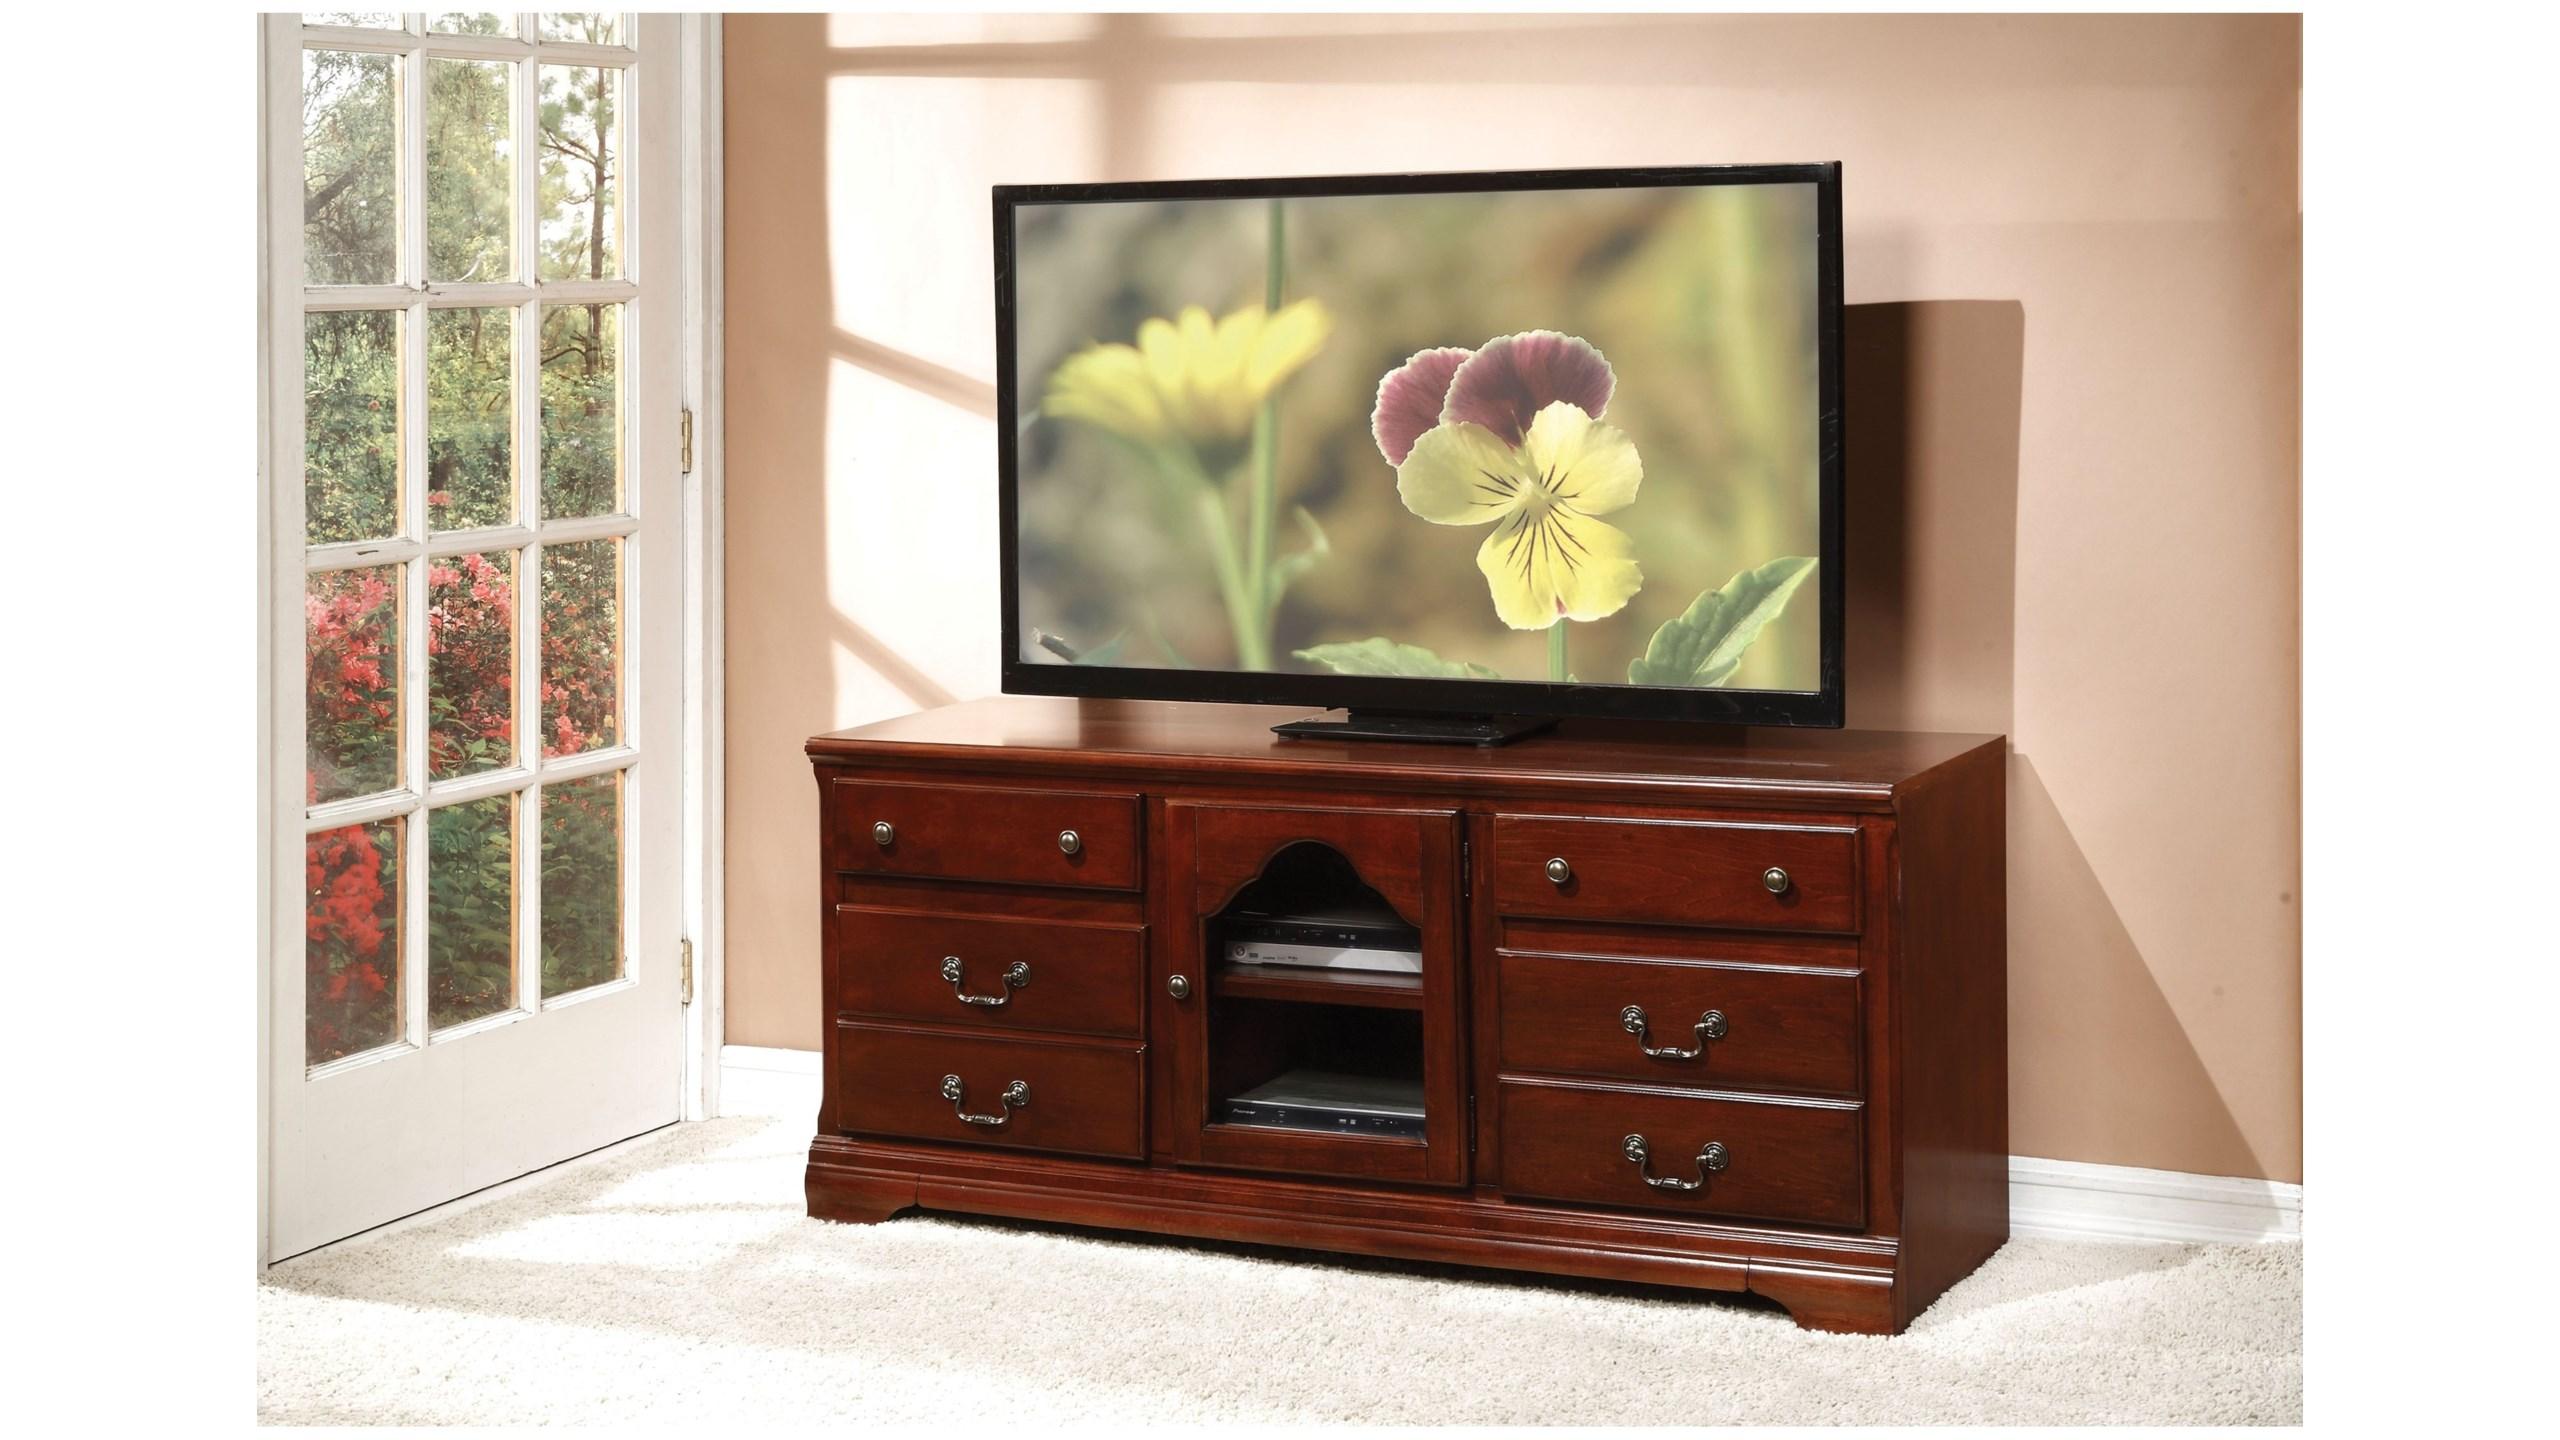 

    
Transitional Cherry TV Stand by Acme Hercules 91113
